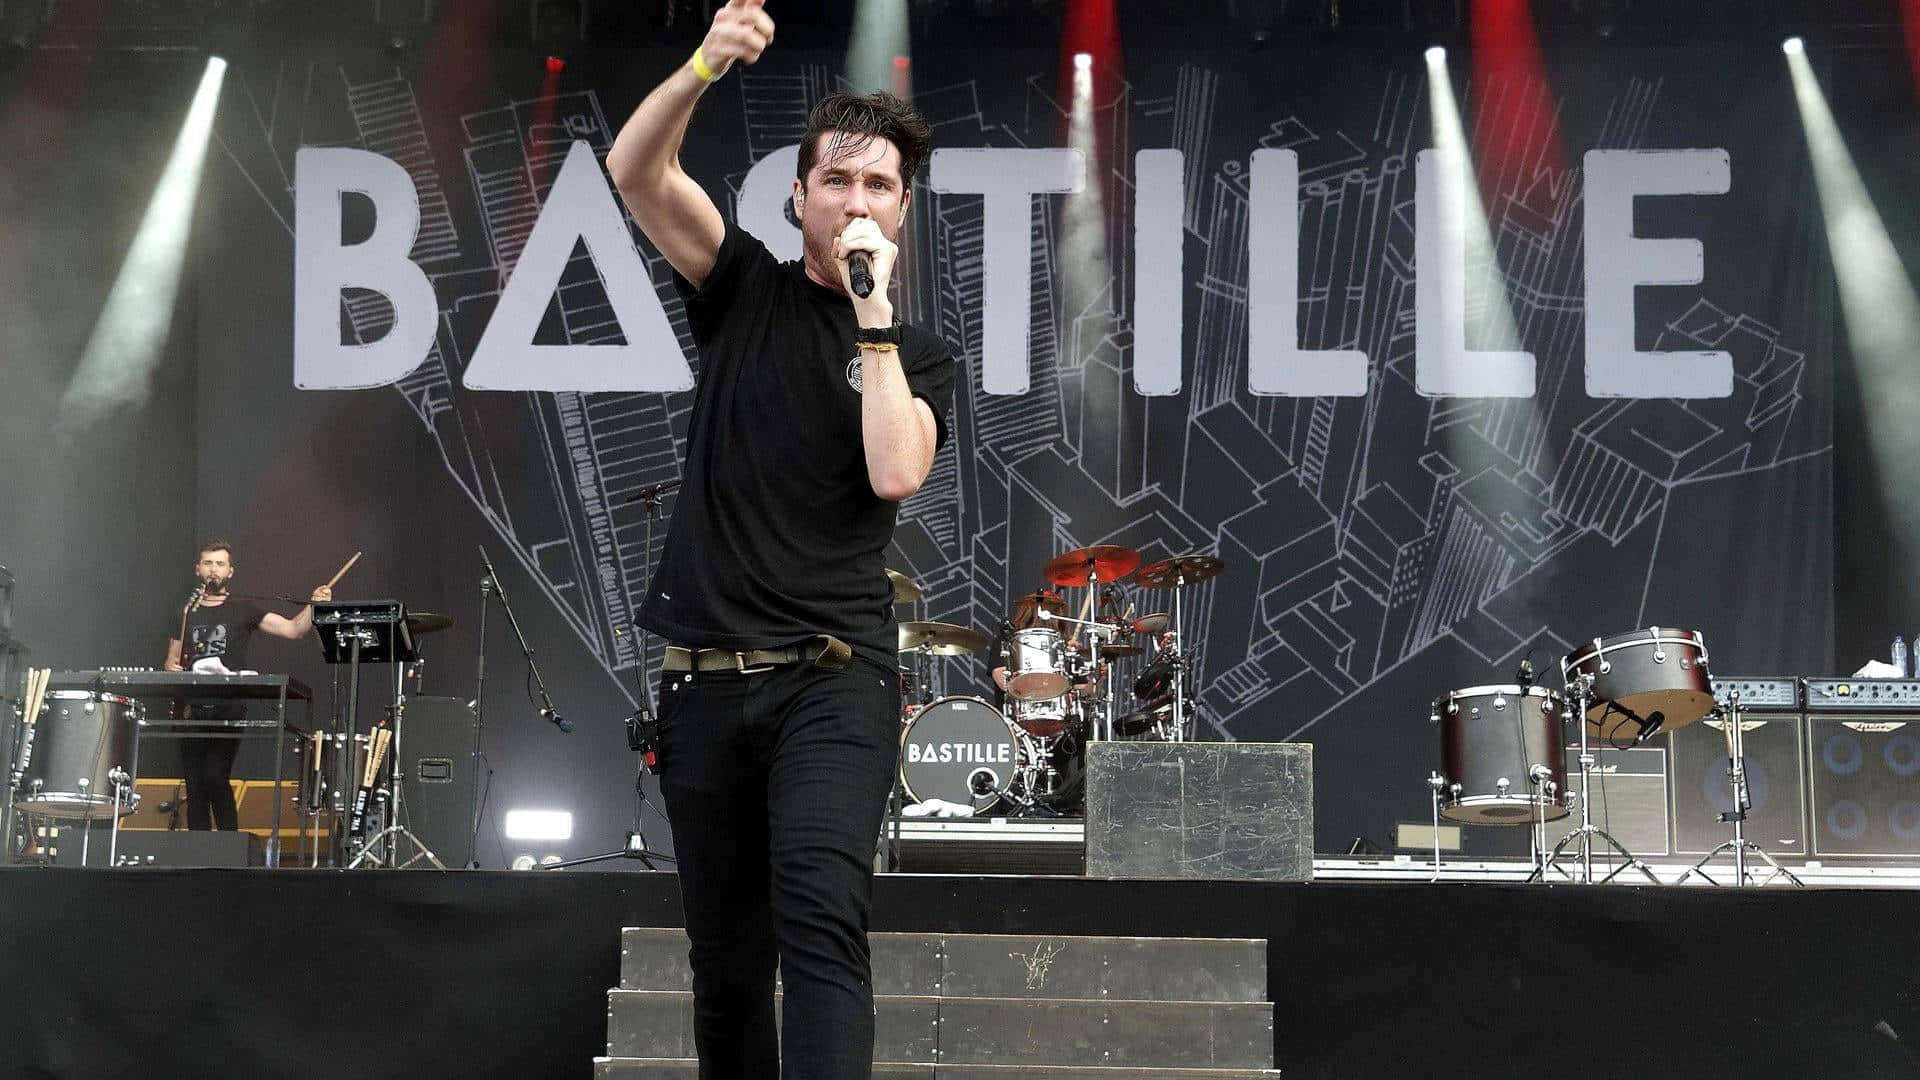 The English Band Bastille Performs a Concert